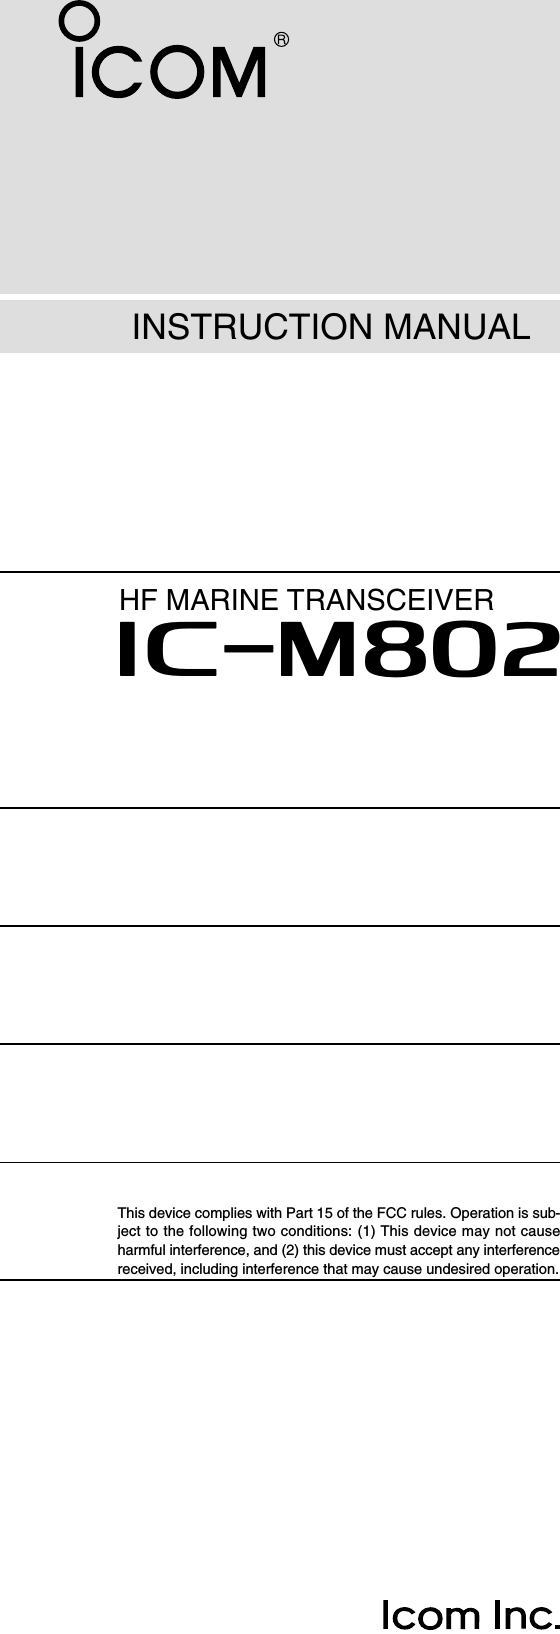 HF MARINE TRANSCEIVERiM802INSTRUCTION MANUALThis device complies with Part 15 of the FCC rules. Operation is sub-ject to the following two conditions: (1) This device may not causeharmful interference, and (2) this device must accept any interferencereceived, including interference that may cause undesired operation.